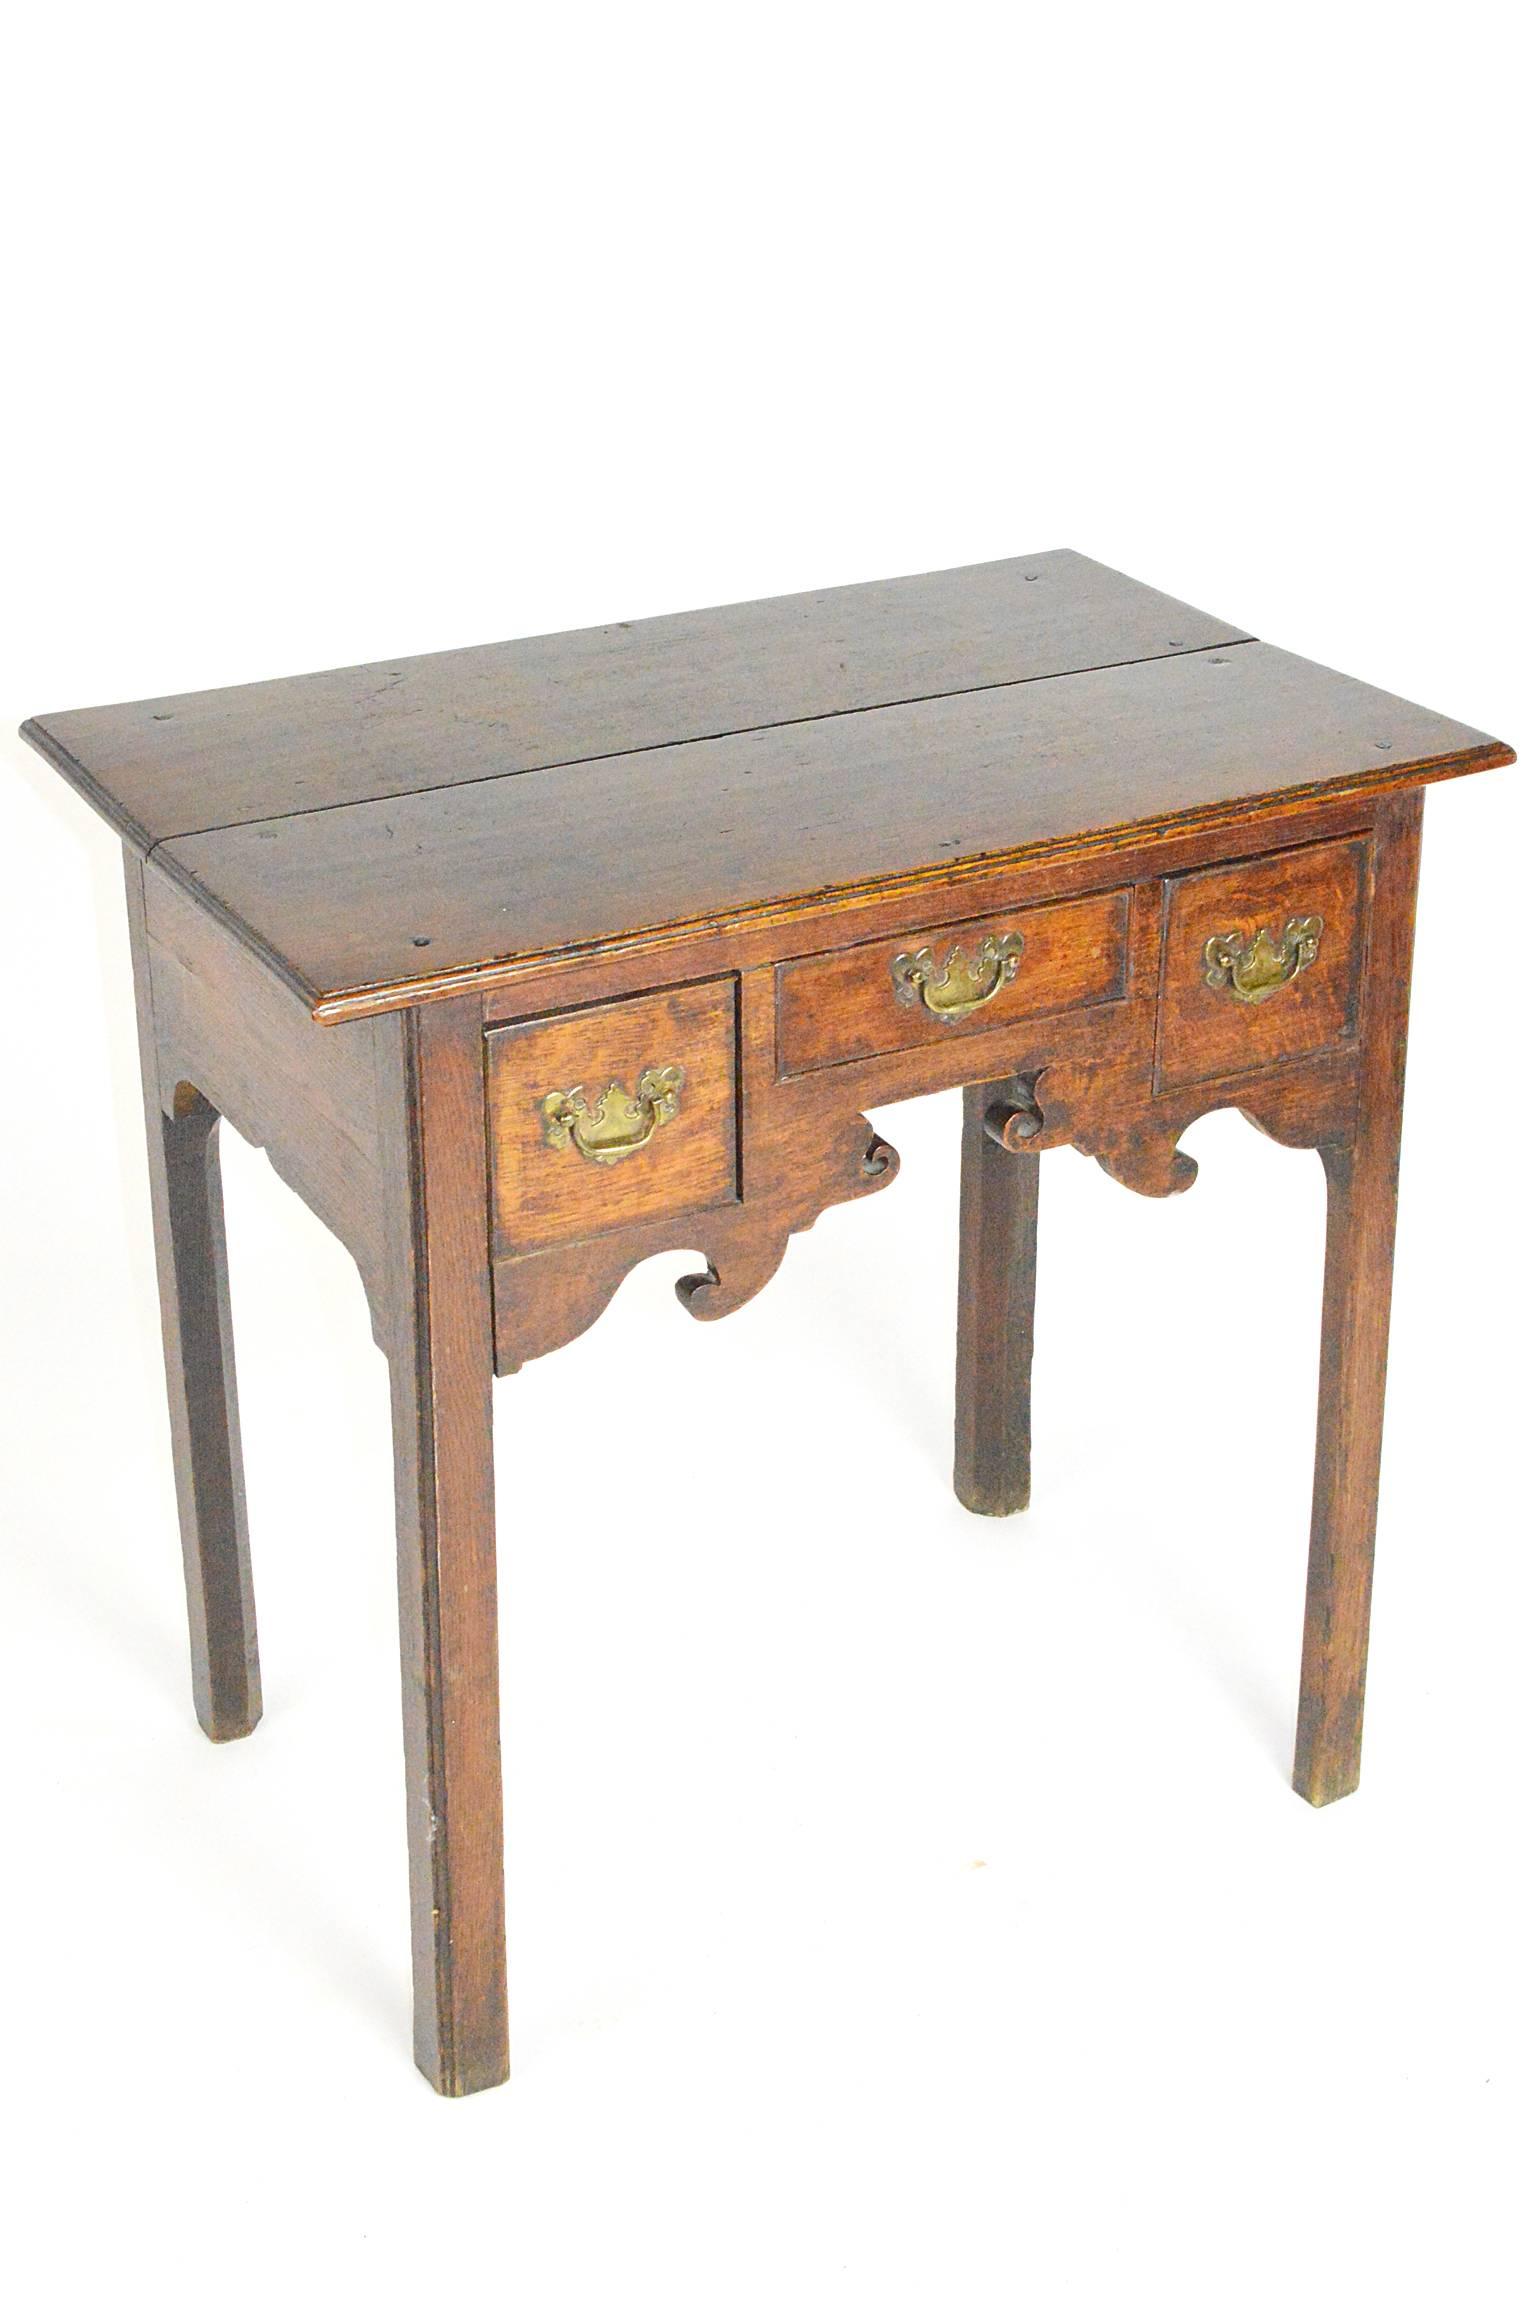 19th Century English oak country lowboy, its center having an elegant shaped frieze over straight legs. 